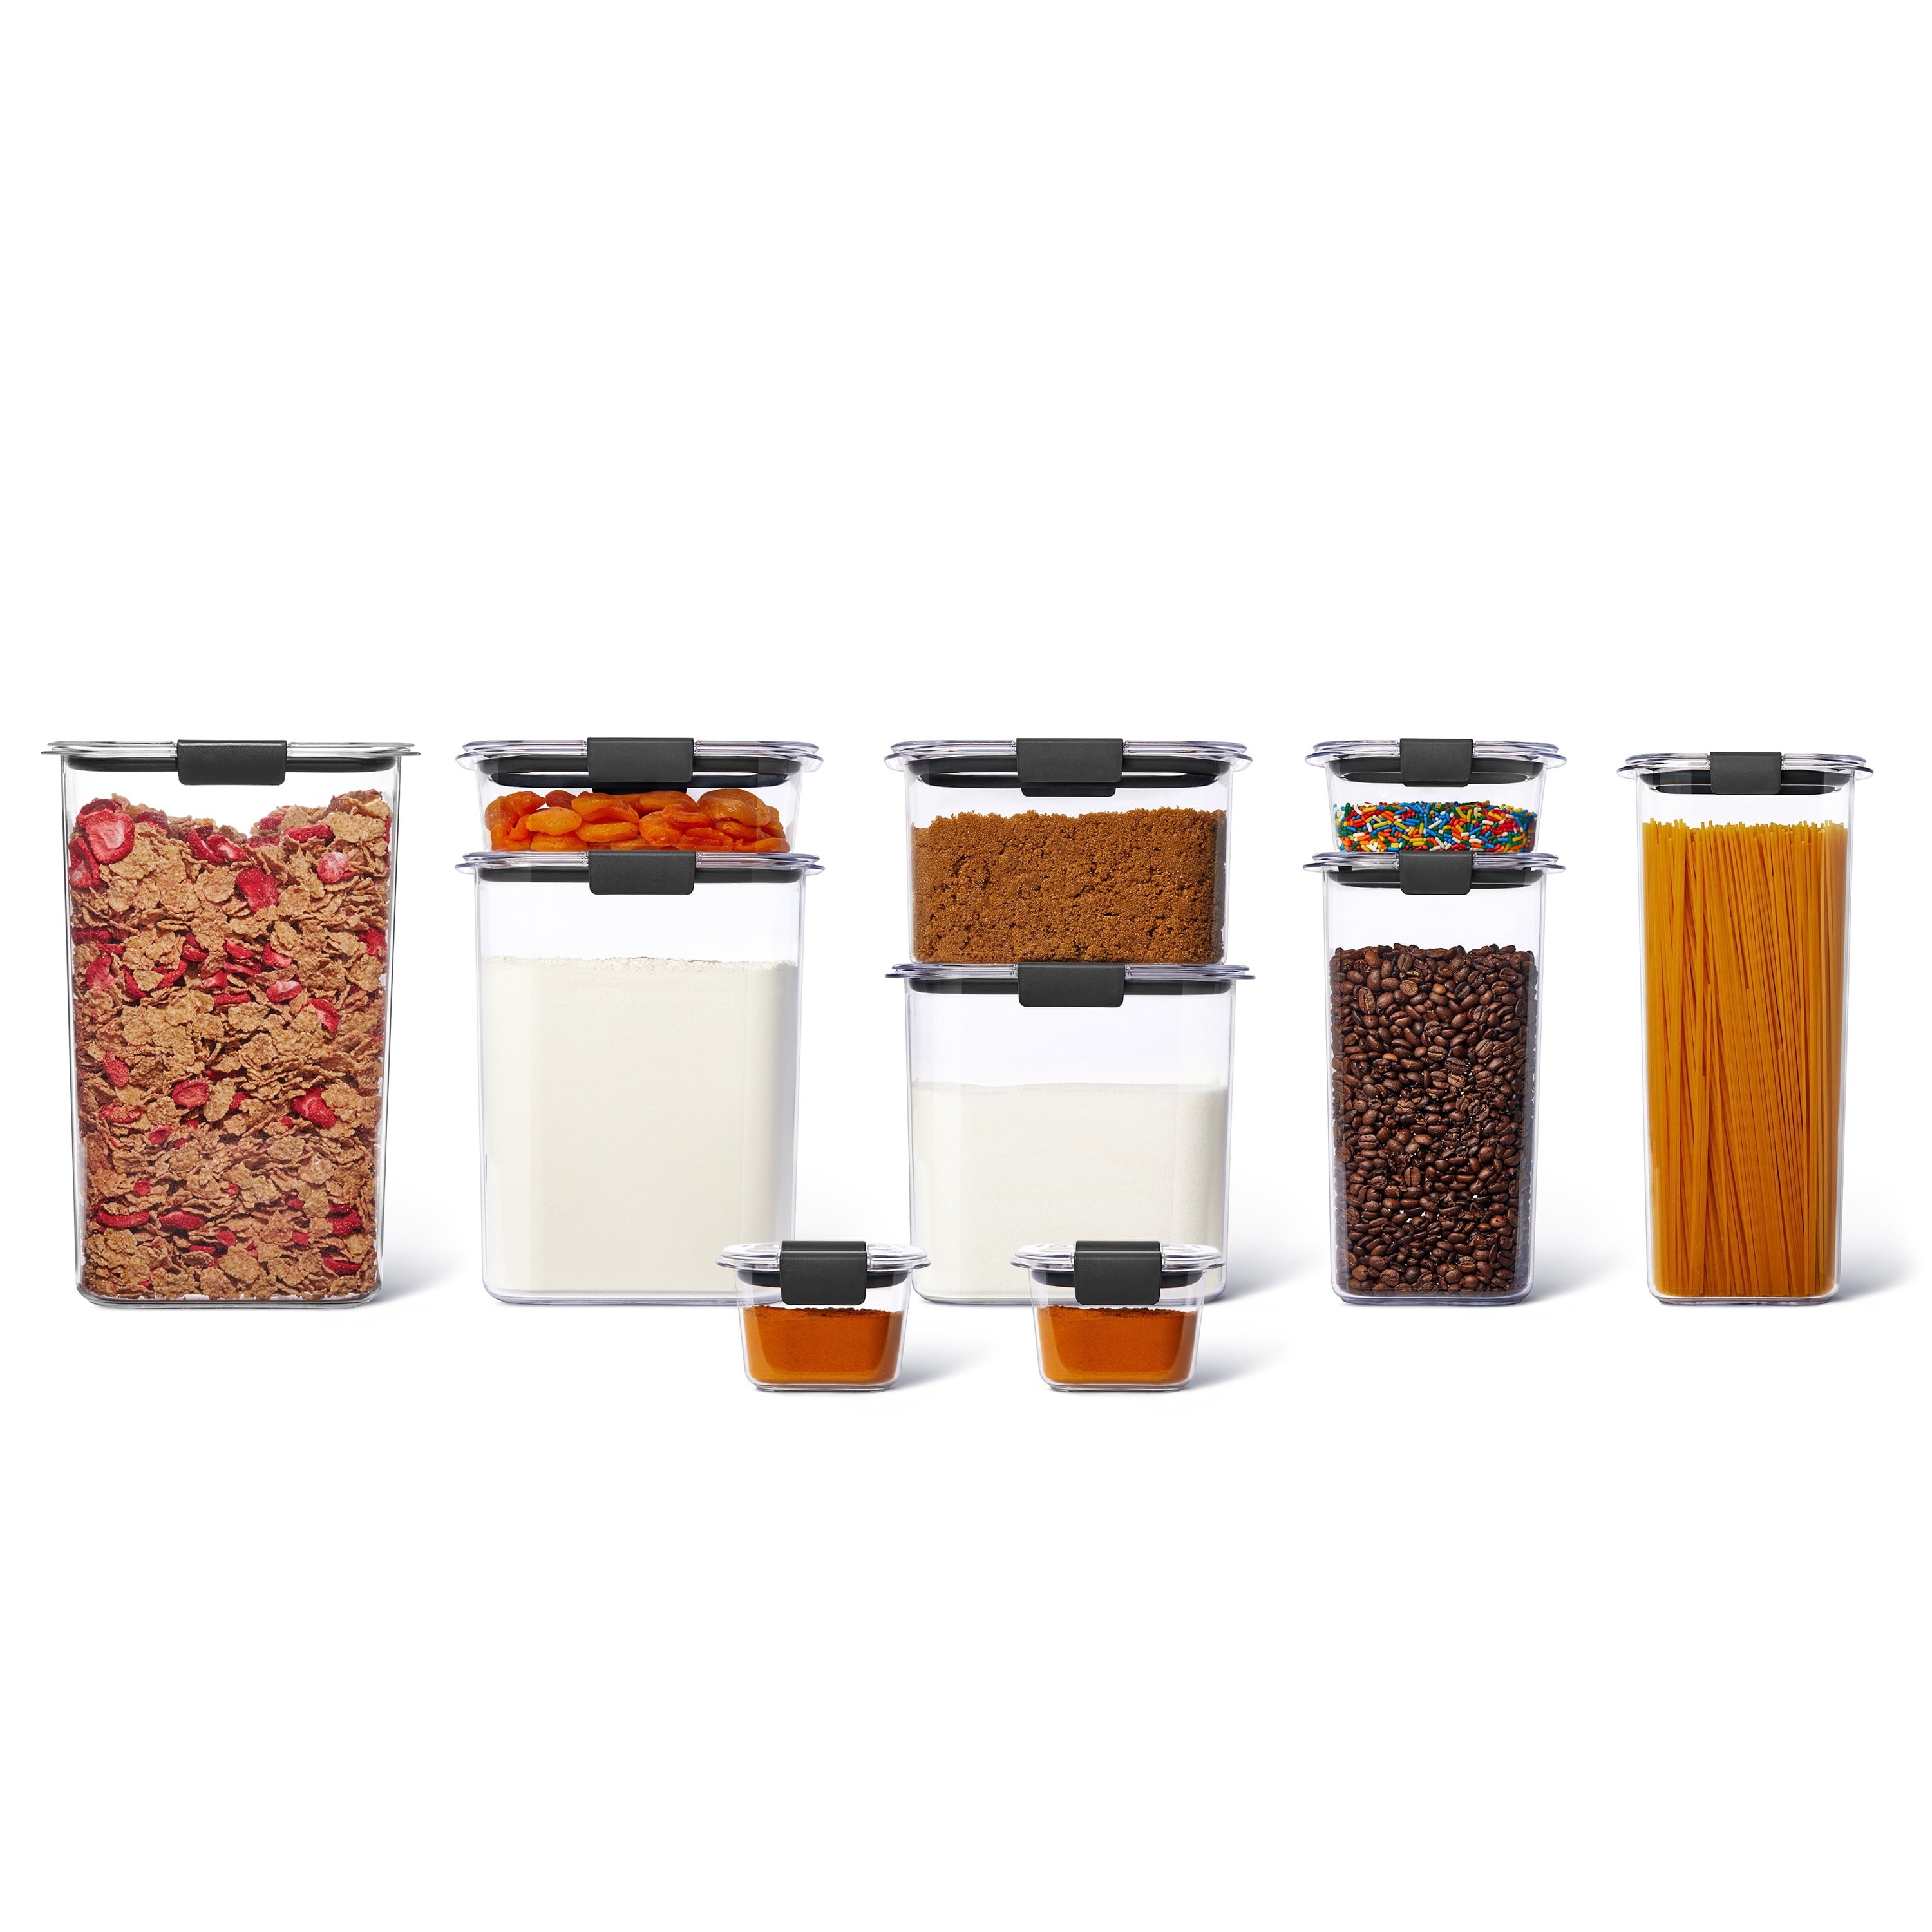 rubbermaid brilliance food storage container sizes